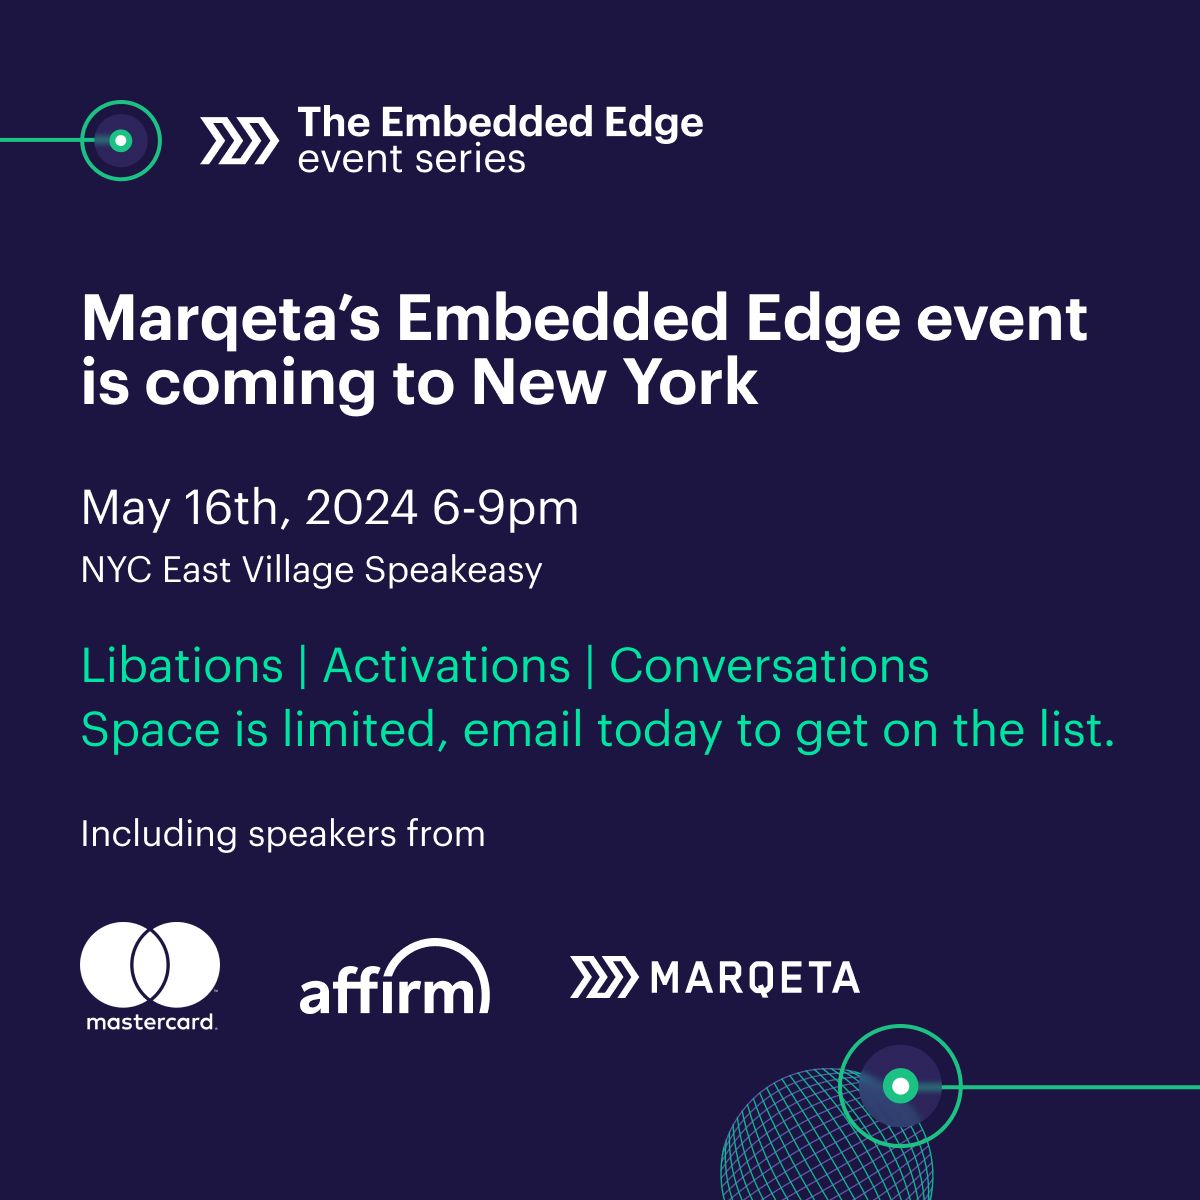 Be sure to grab a spot at our NYC speakeasy event to hear how #embeddedfinance is unlocking new financial experiences. You'll get the opportunity to chat with leaders from Affirm and Mastercard while enjoying live entertainment.

Reserve your spot!  👉 embeddededge@marqeta.com